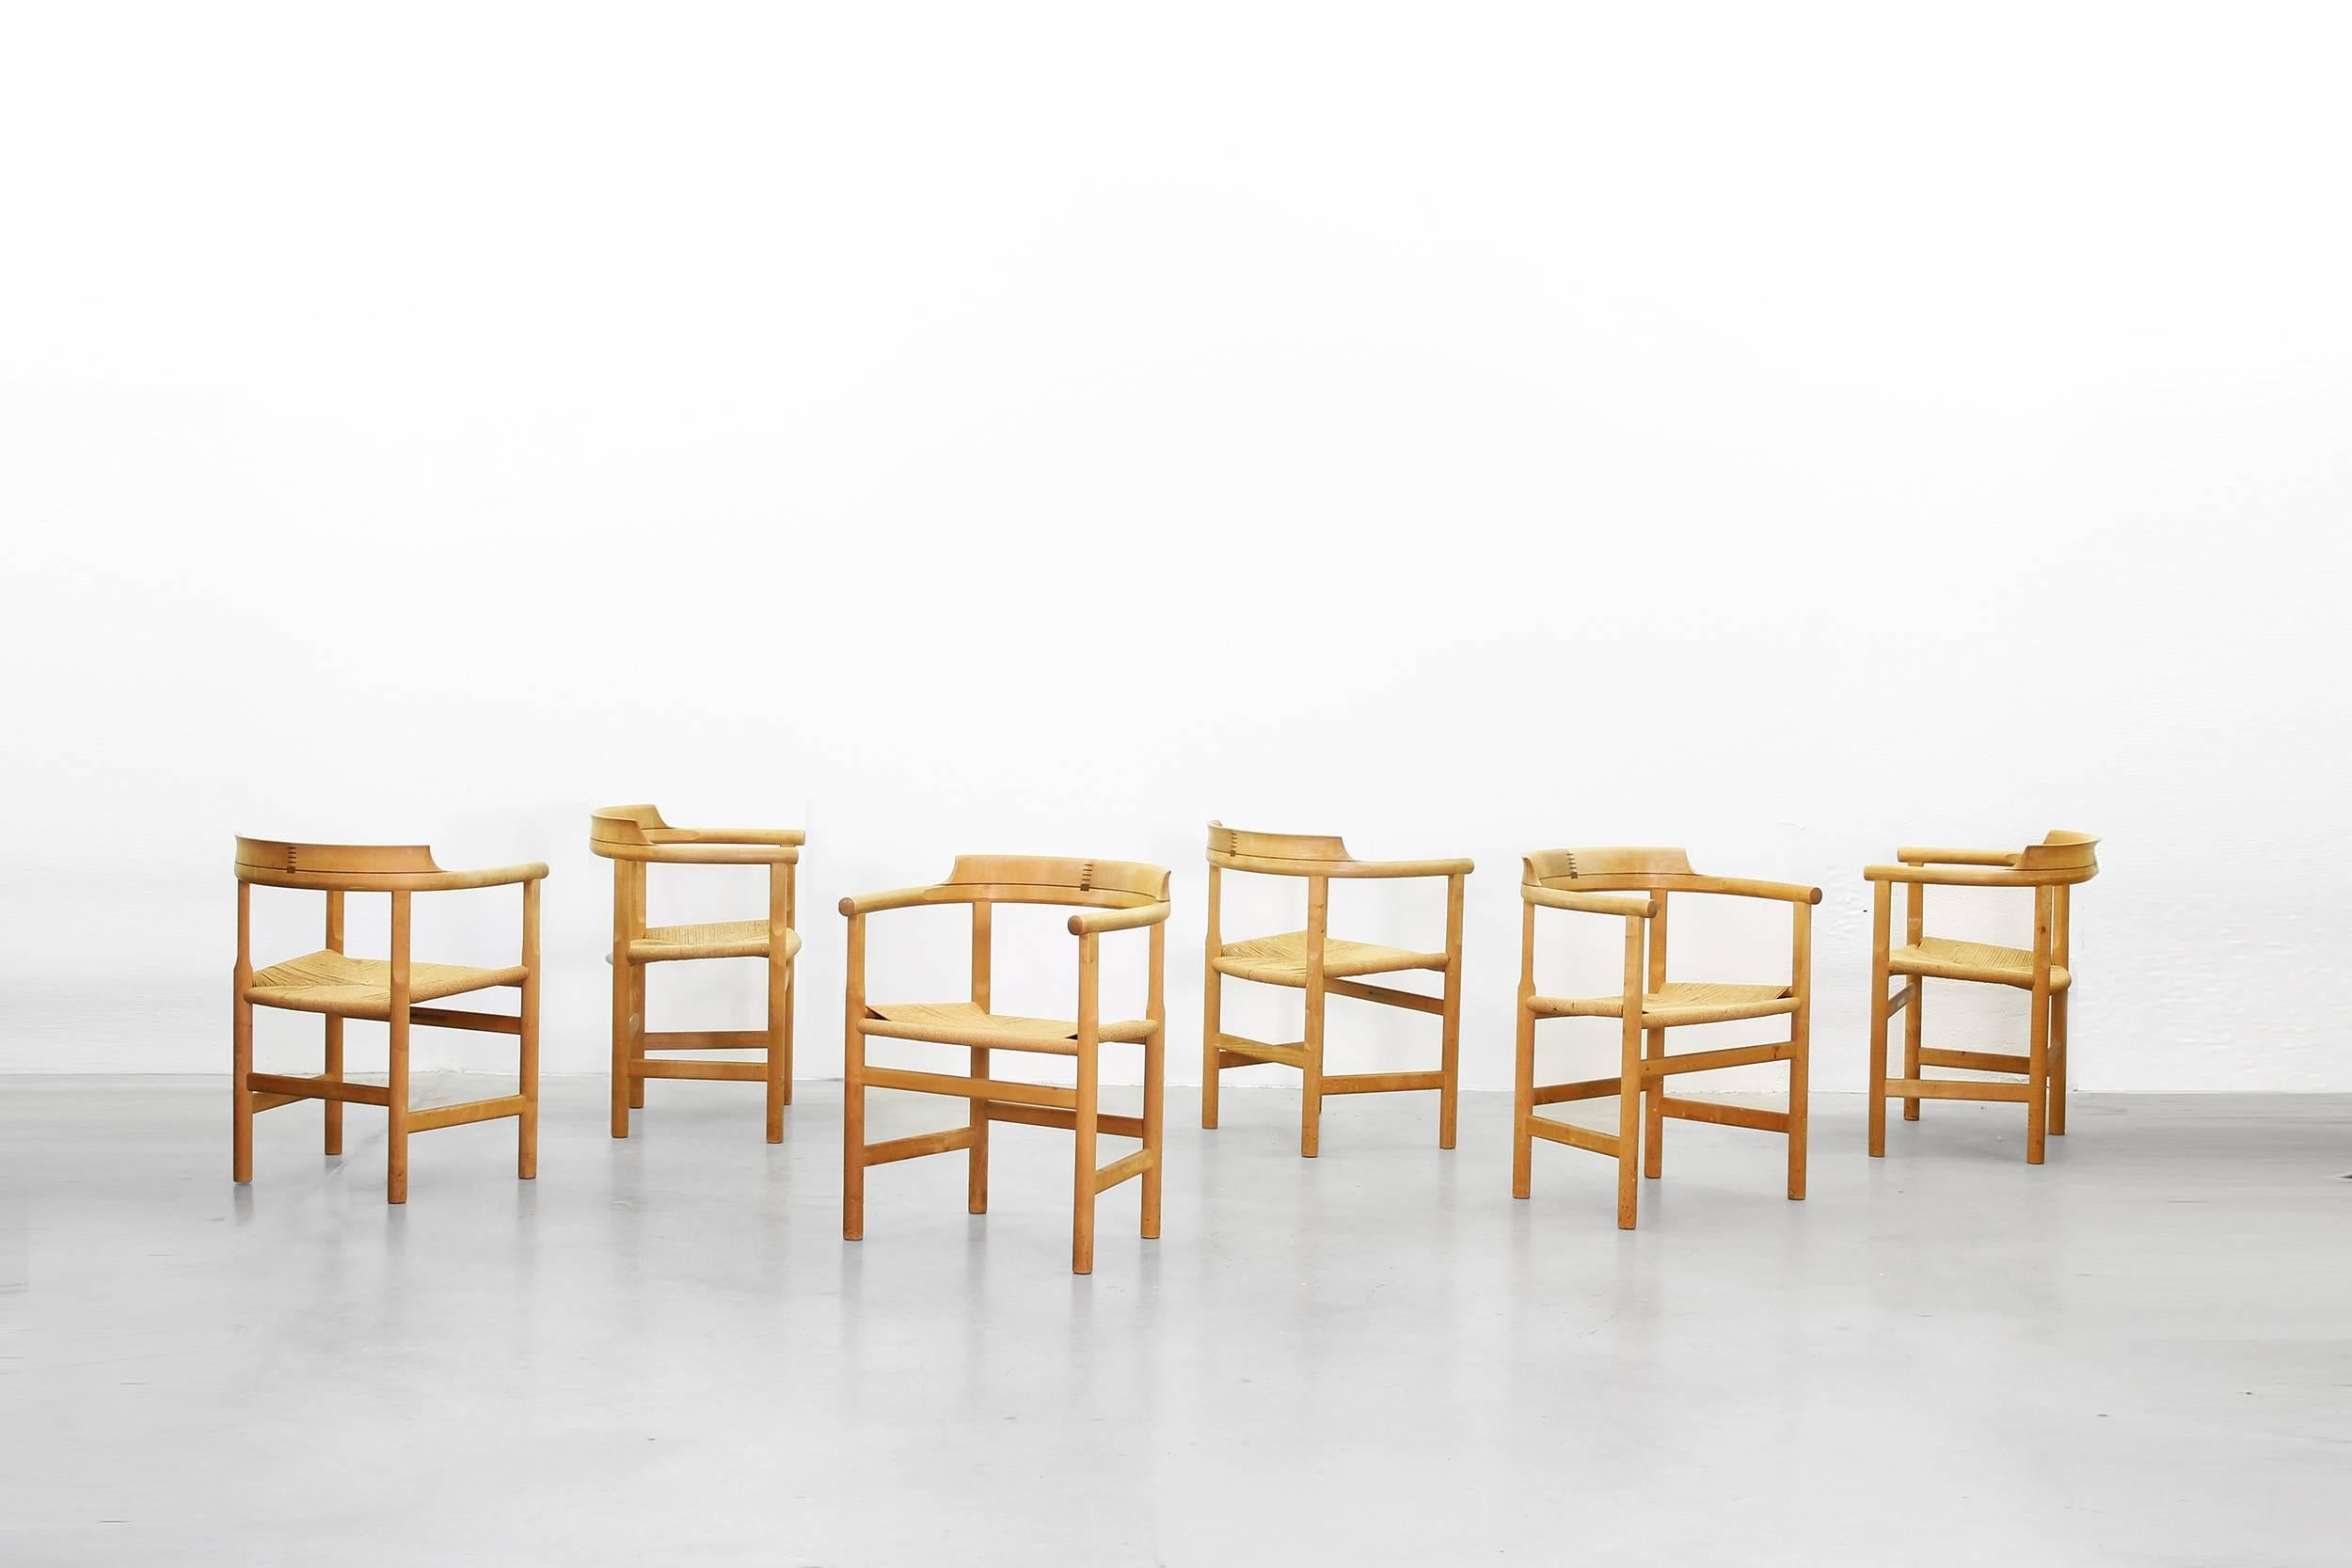 A beautiful set of six armchairs designed by Hans J. Wegner for PP Mobler, Denmark in 1975. All chairs are in a good condition without any repairs or damages. The frames are made of maple and the seats are woven with paper cord.